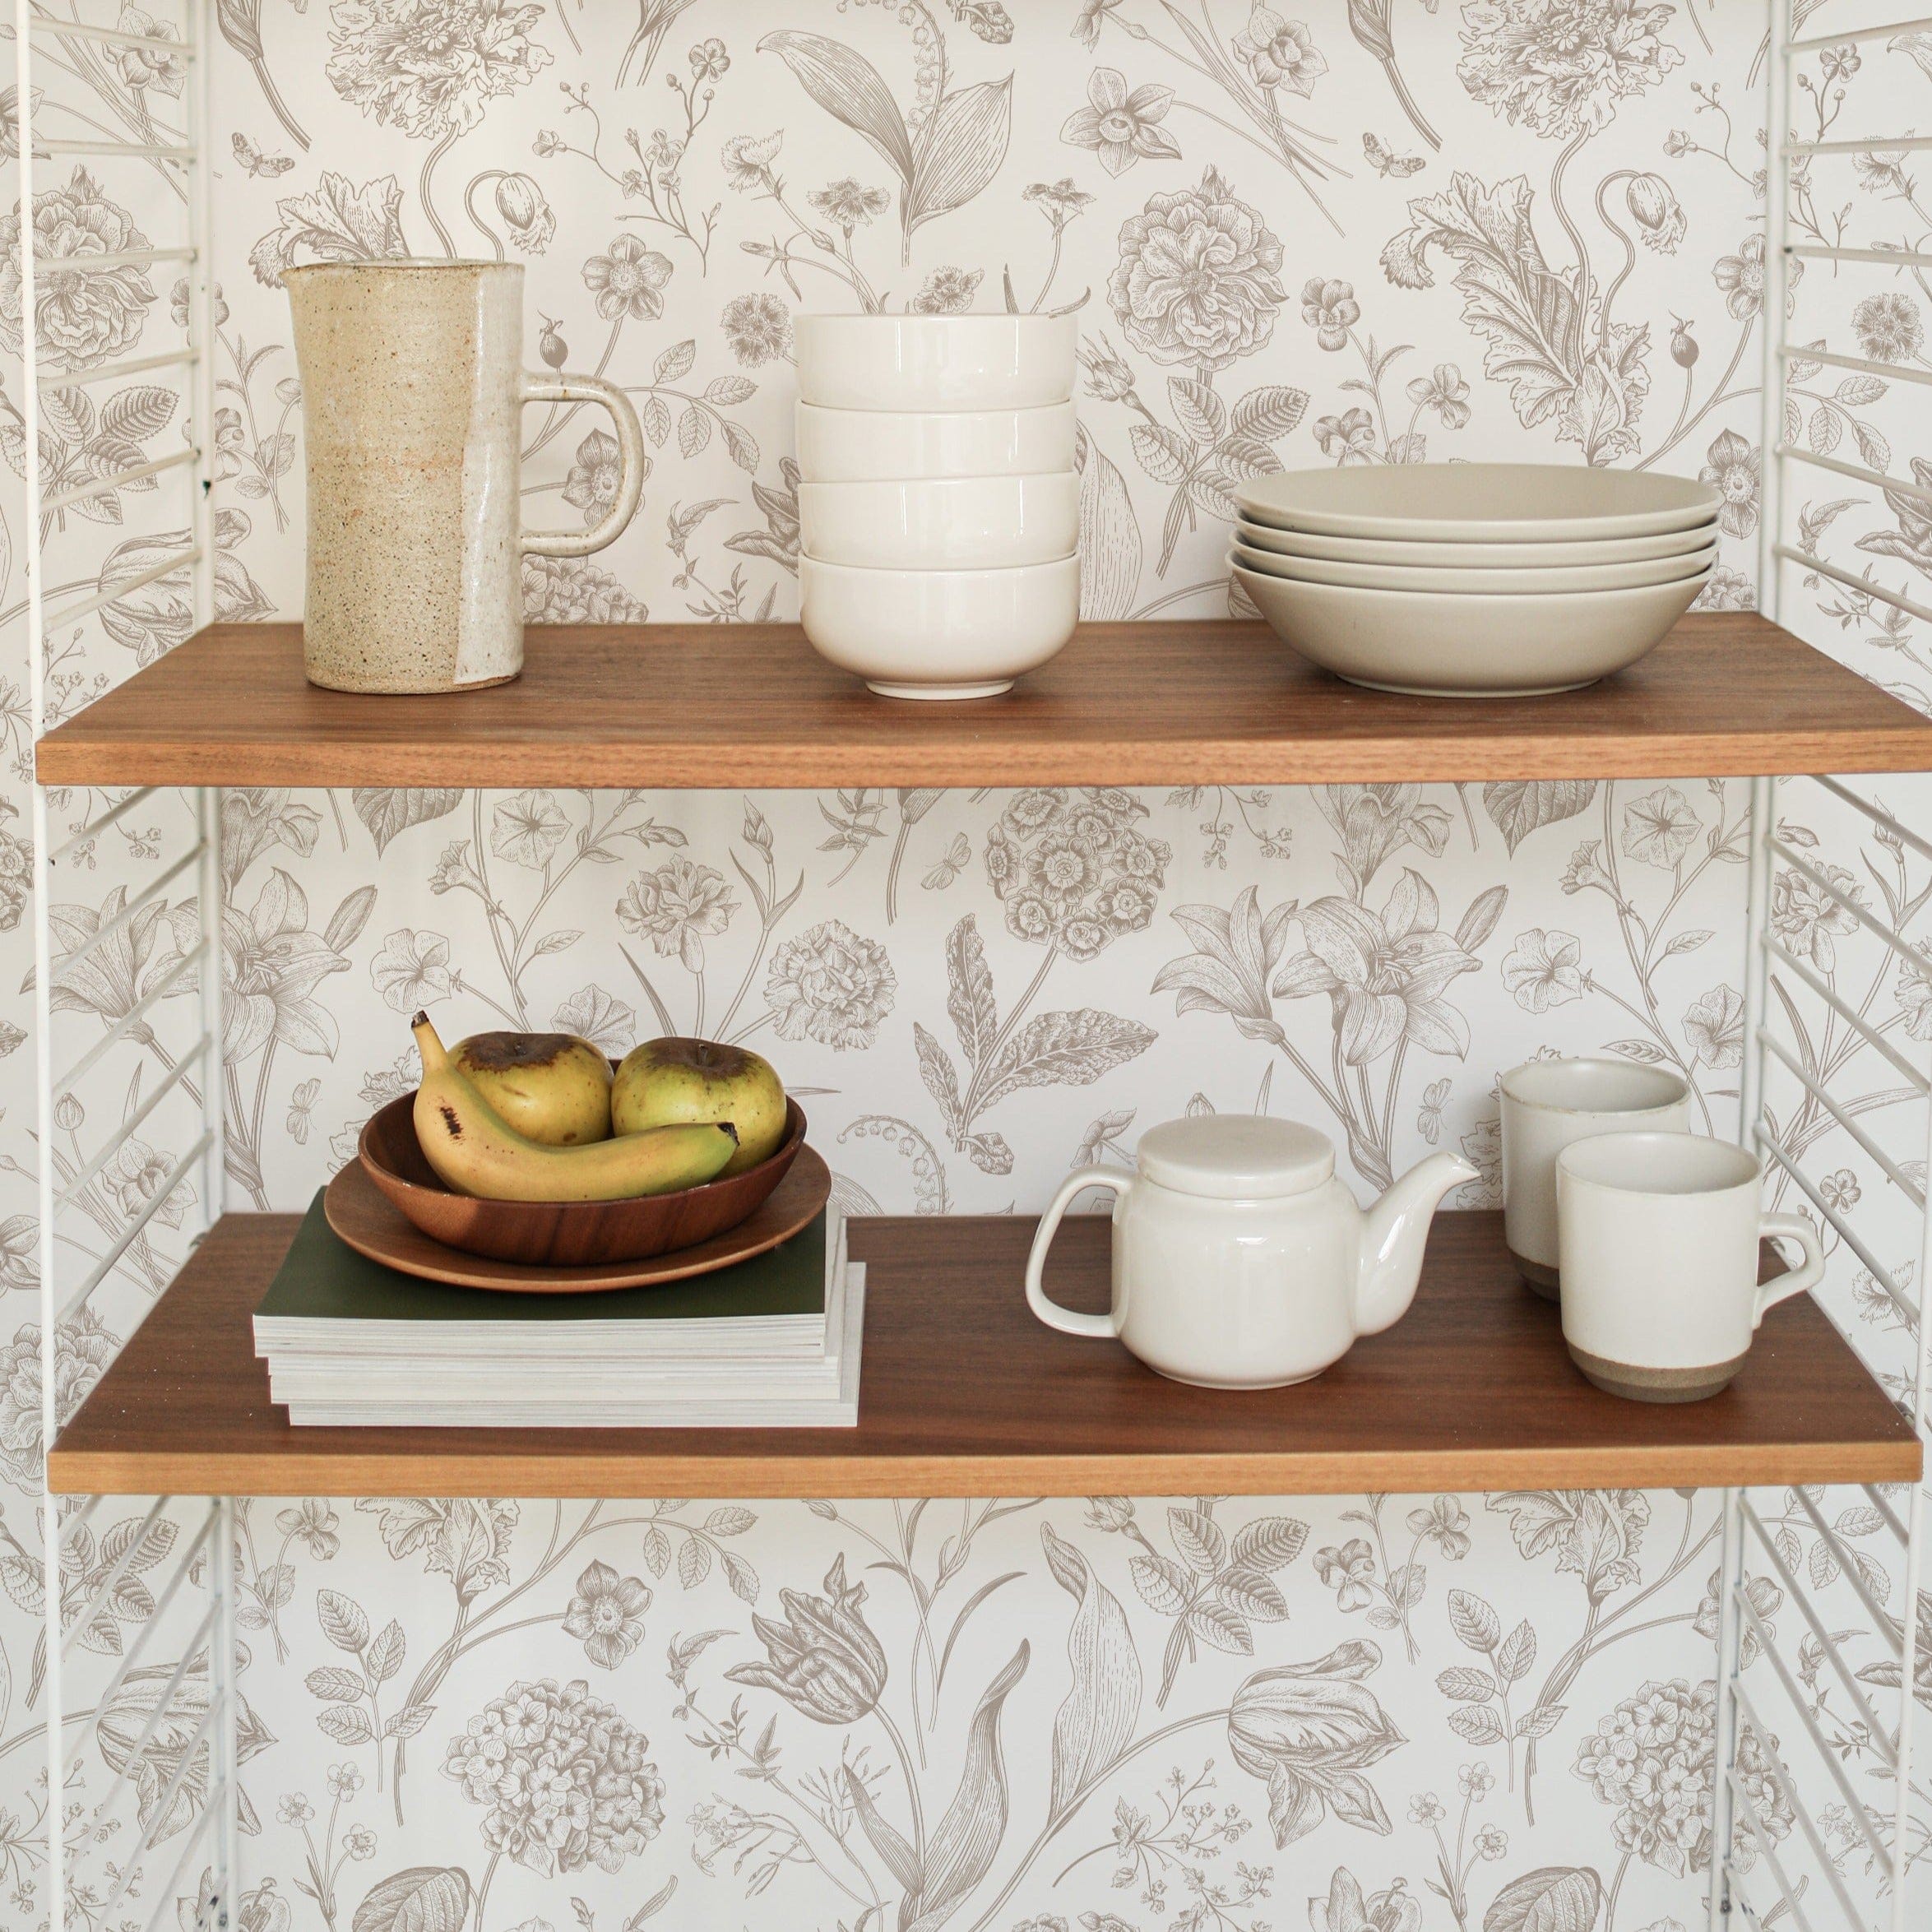 Open wooden shelves against a wall covered with Toile De Jouy Floral Wallpaper, which is adorned with delicate floral drawings. The shelves hold an array of kitchenware, adding a functional touch to the decorative space